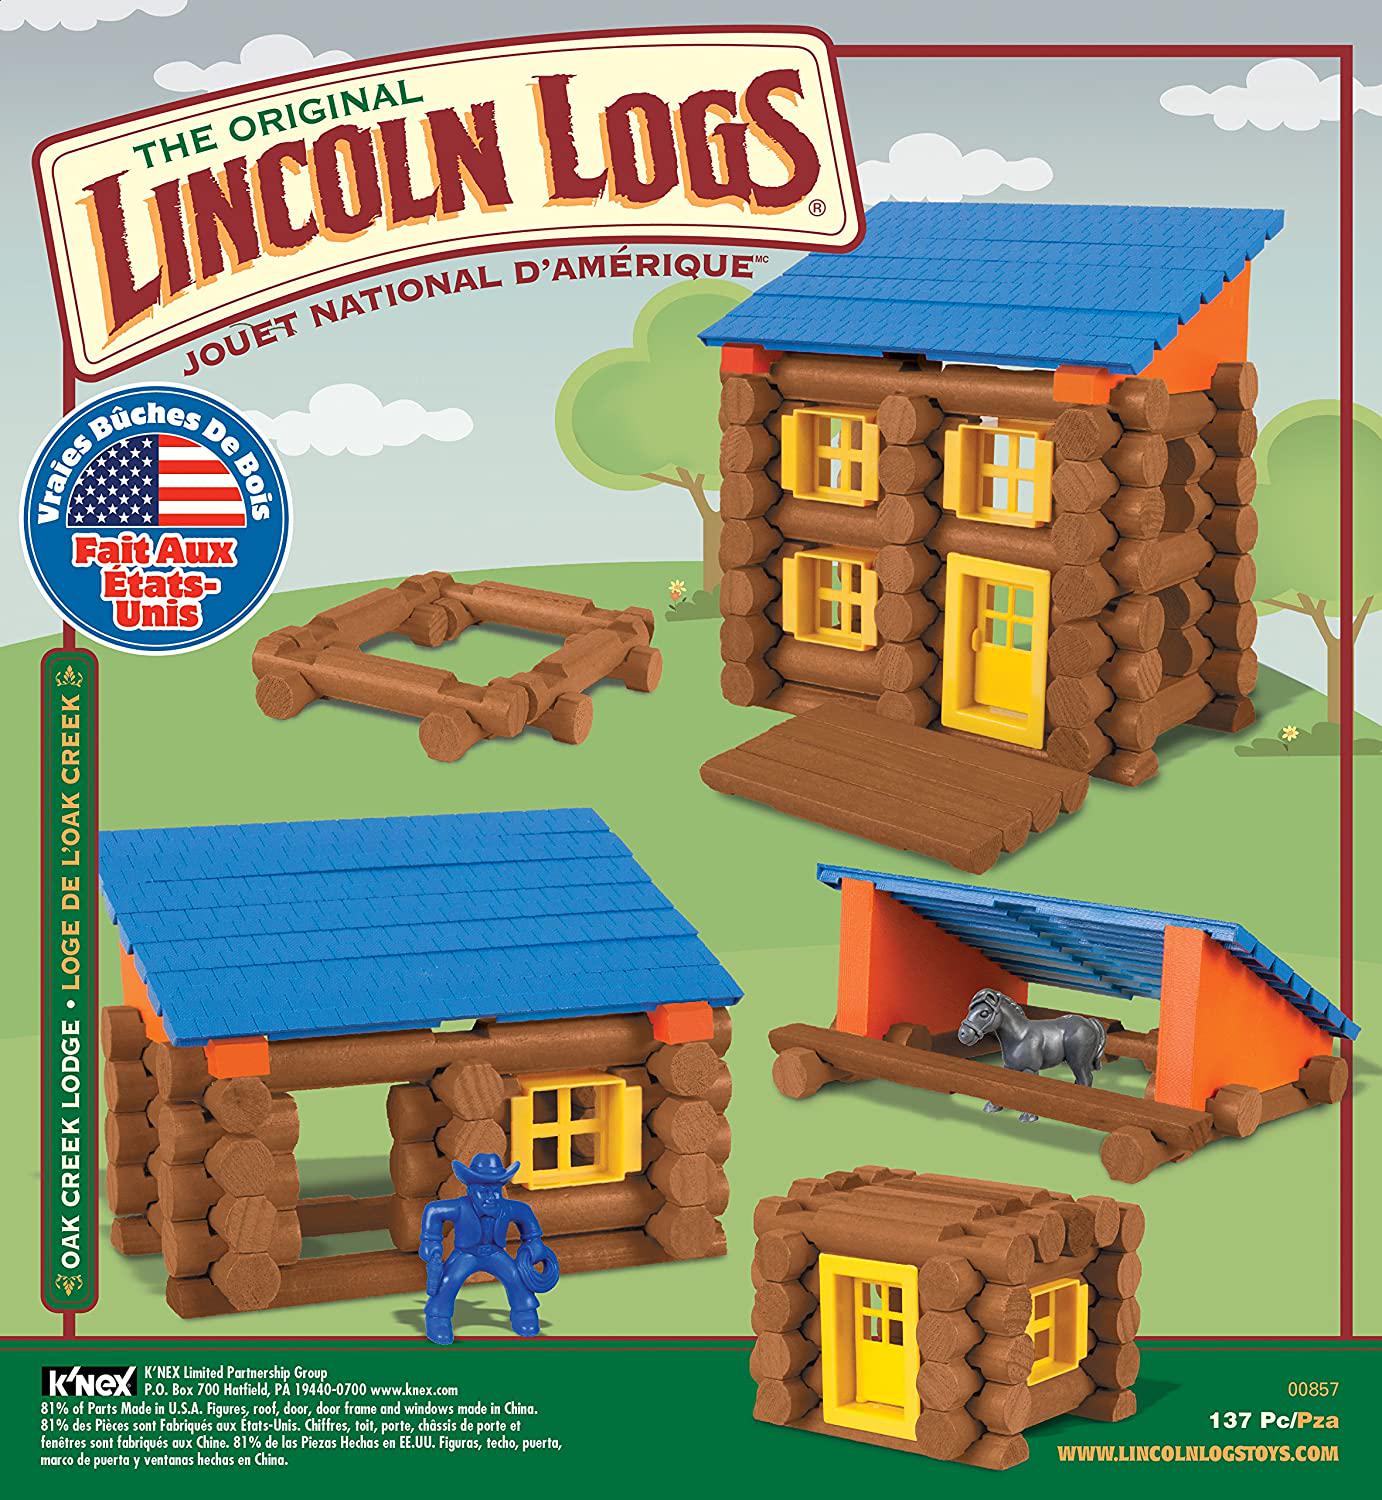 Lincoln Logs, Lincoln Logs - Oak Creek Lodge Building Set - 137 Pieces, Real Wood Logs - Ages 3+ - Retro Building Gift Set for Boys/Girls - Creative Construction Engineering, Preschool Education Toy